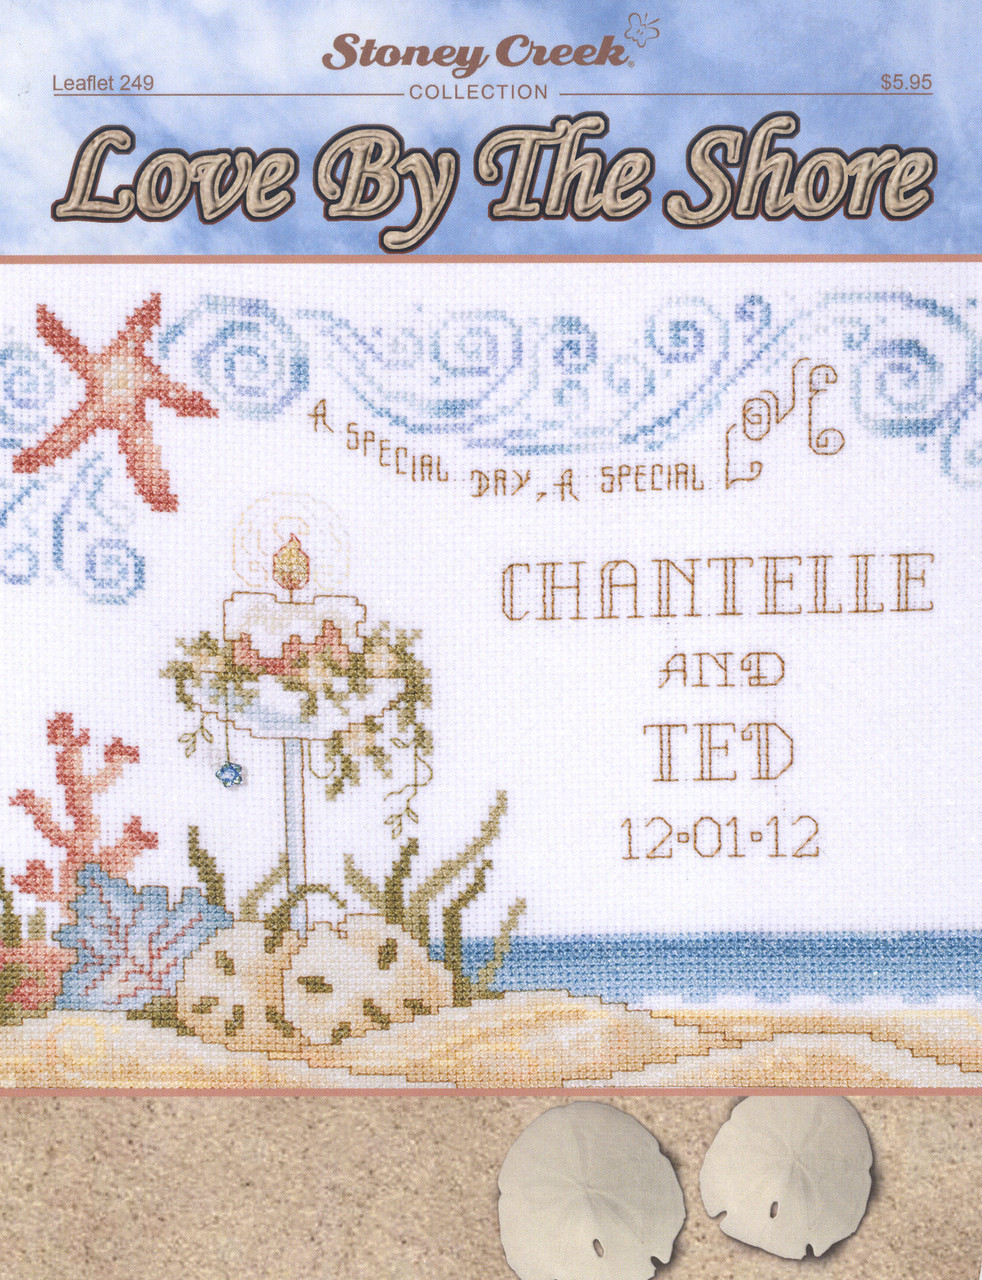 Stoney Creek - Love by the Shore Wedding Record